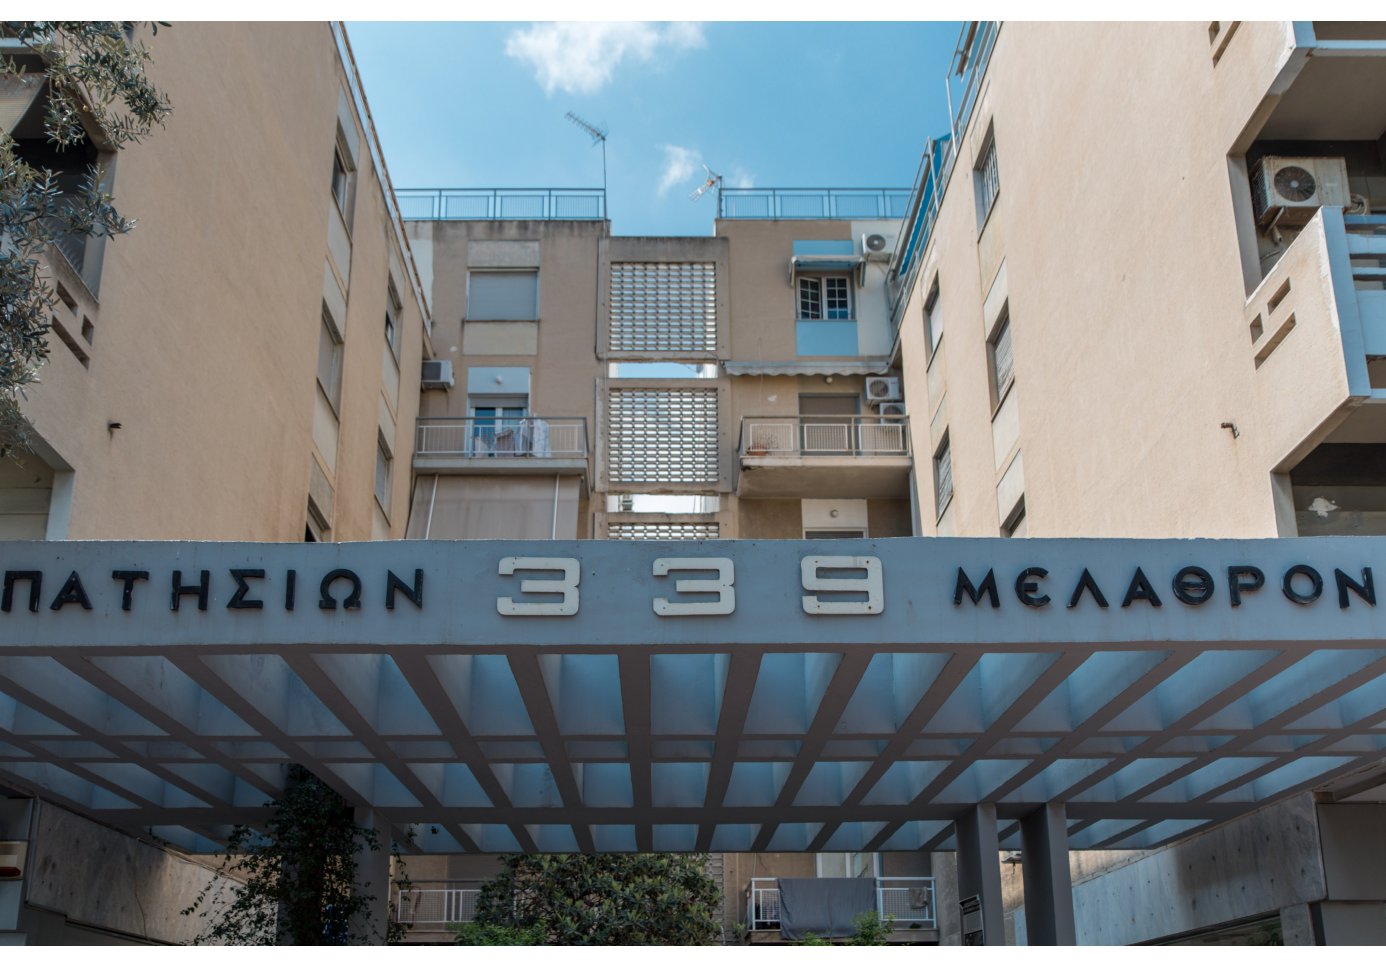 the entrance of a building, the sign reads "Patision Melathon 339".